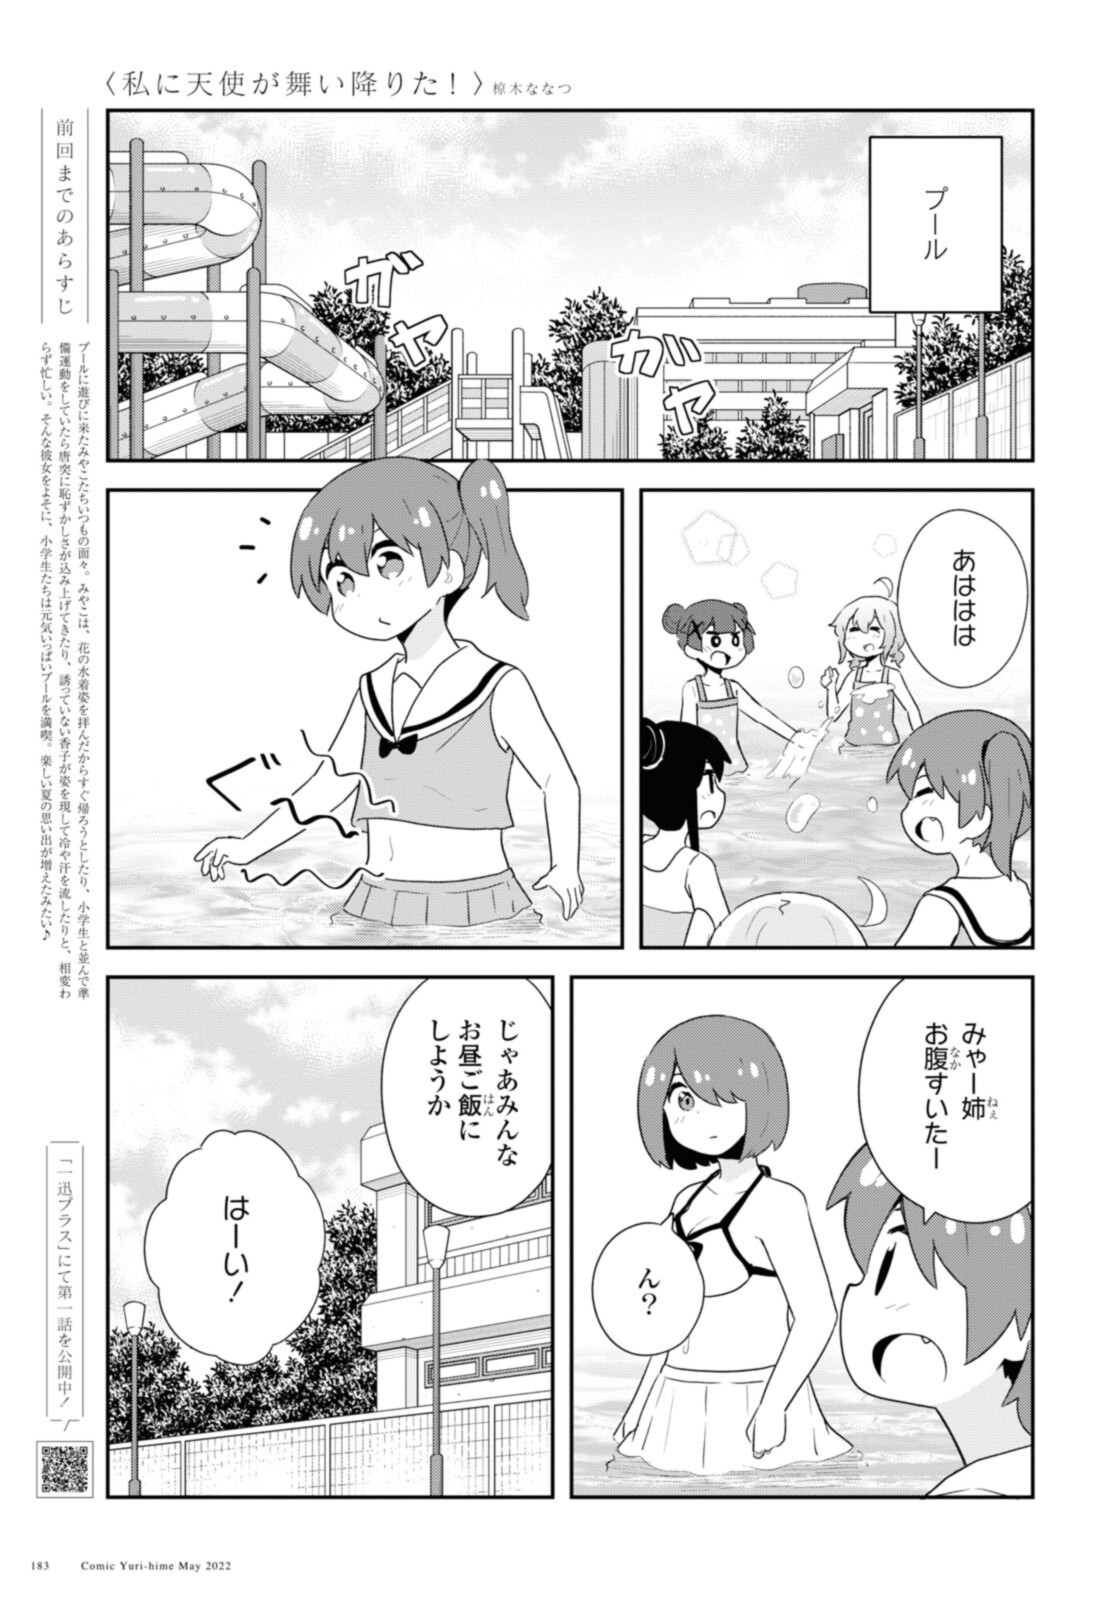 Wataten! An Angel Flew Down to Me 私に天使が舞い降りた！ 第95話 - Page 1